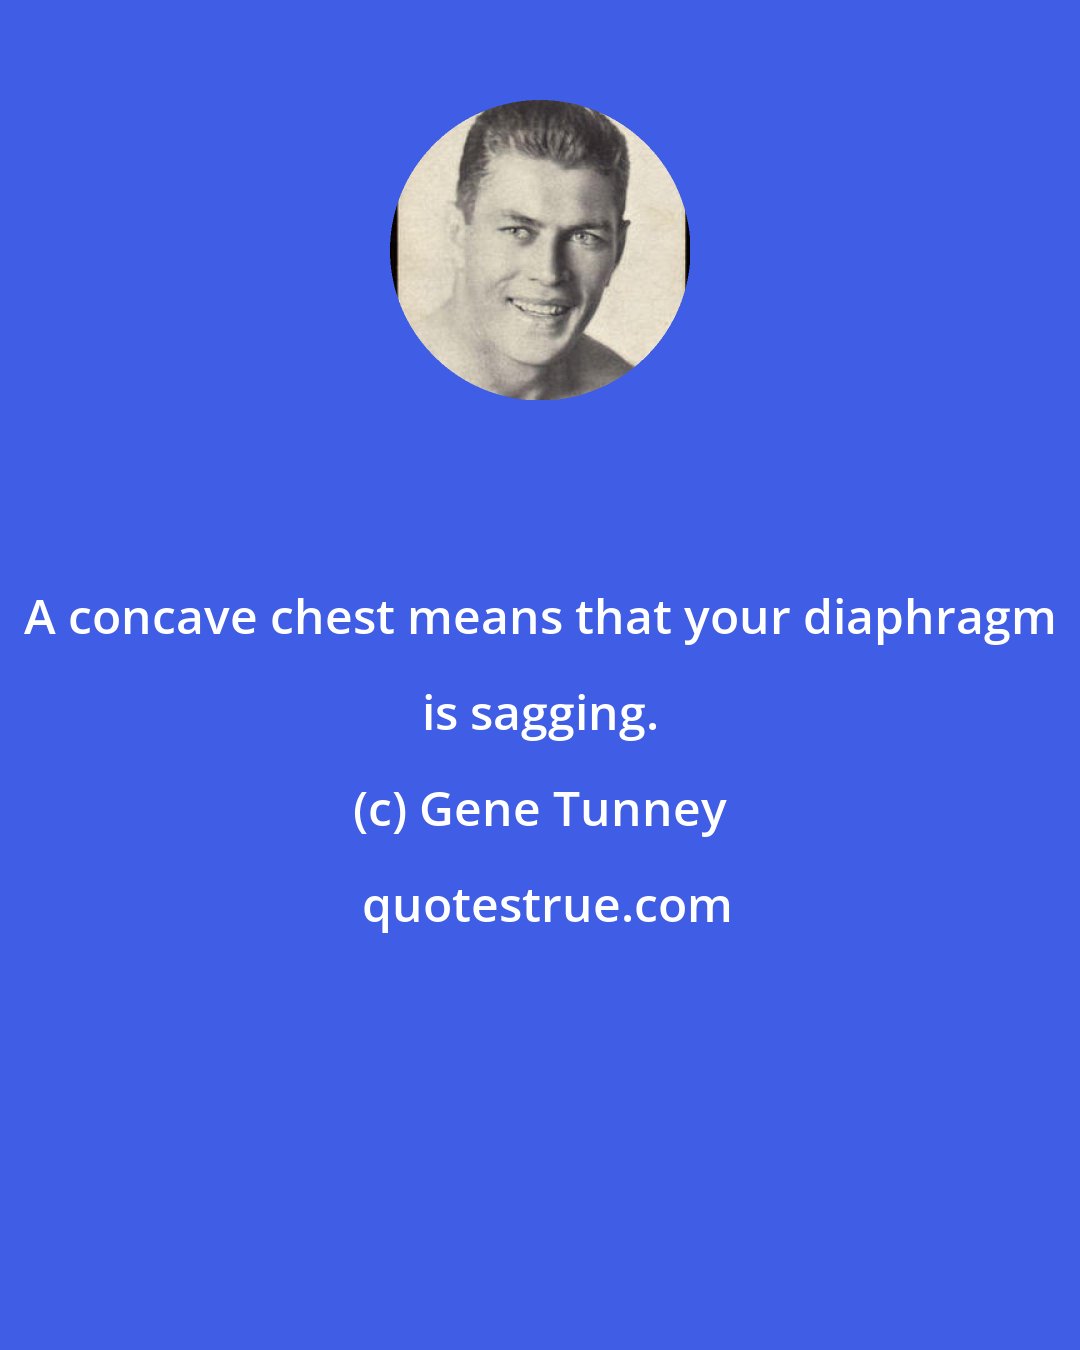 Gene Tunney: A concave chest means that your diaphragm is sagging.